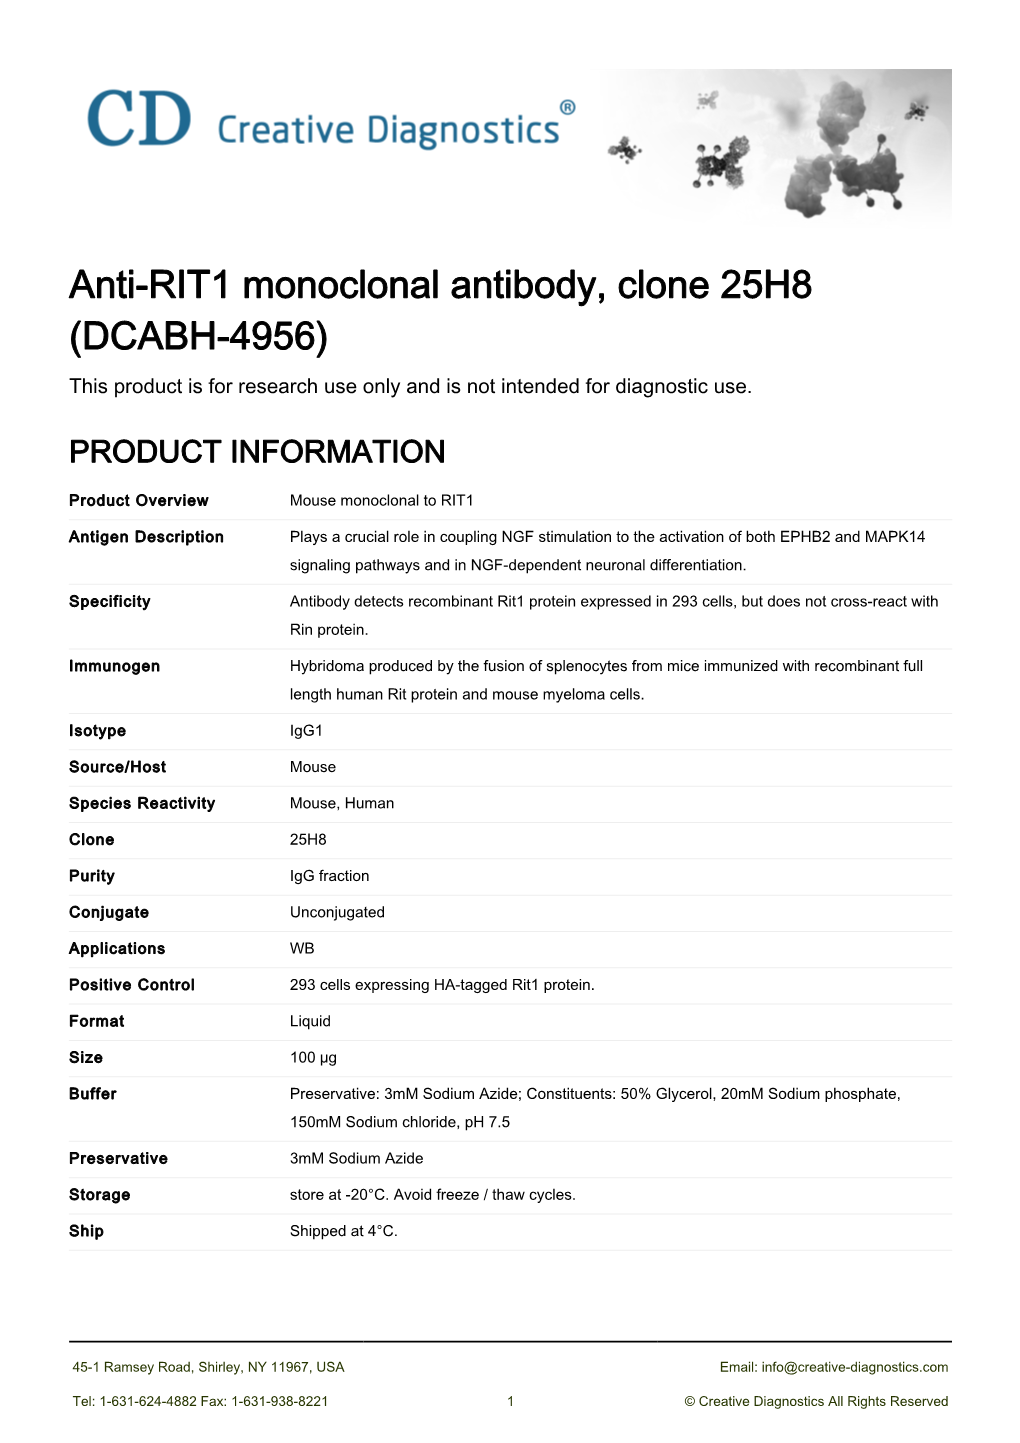 Anti-RIT1 Monoclonal Antibody, Clone 25H8 (DCABH-4956) This Product Is for Research Use Only and Is Not Intended for Diagnostic Use